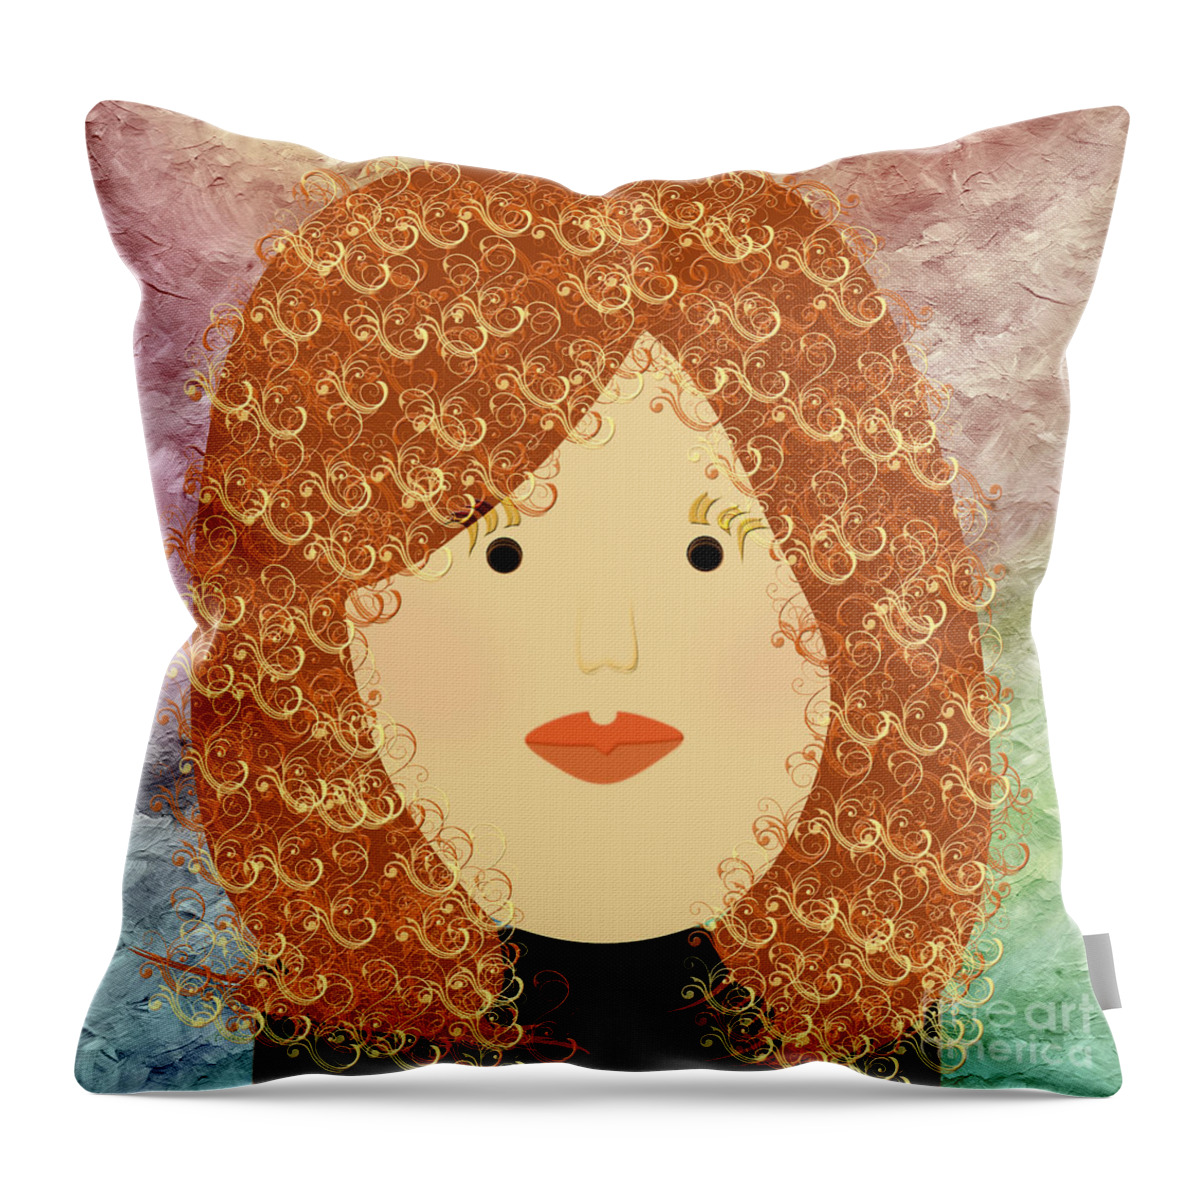 Andee Design Throw Pillow featuring the digital art Porcelain Doll 20 by Andee Design